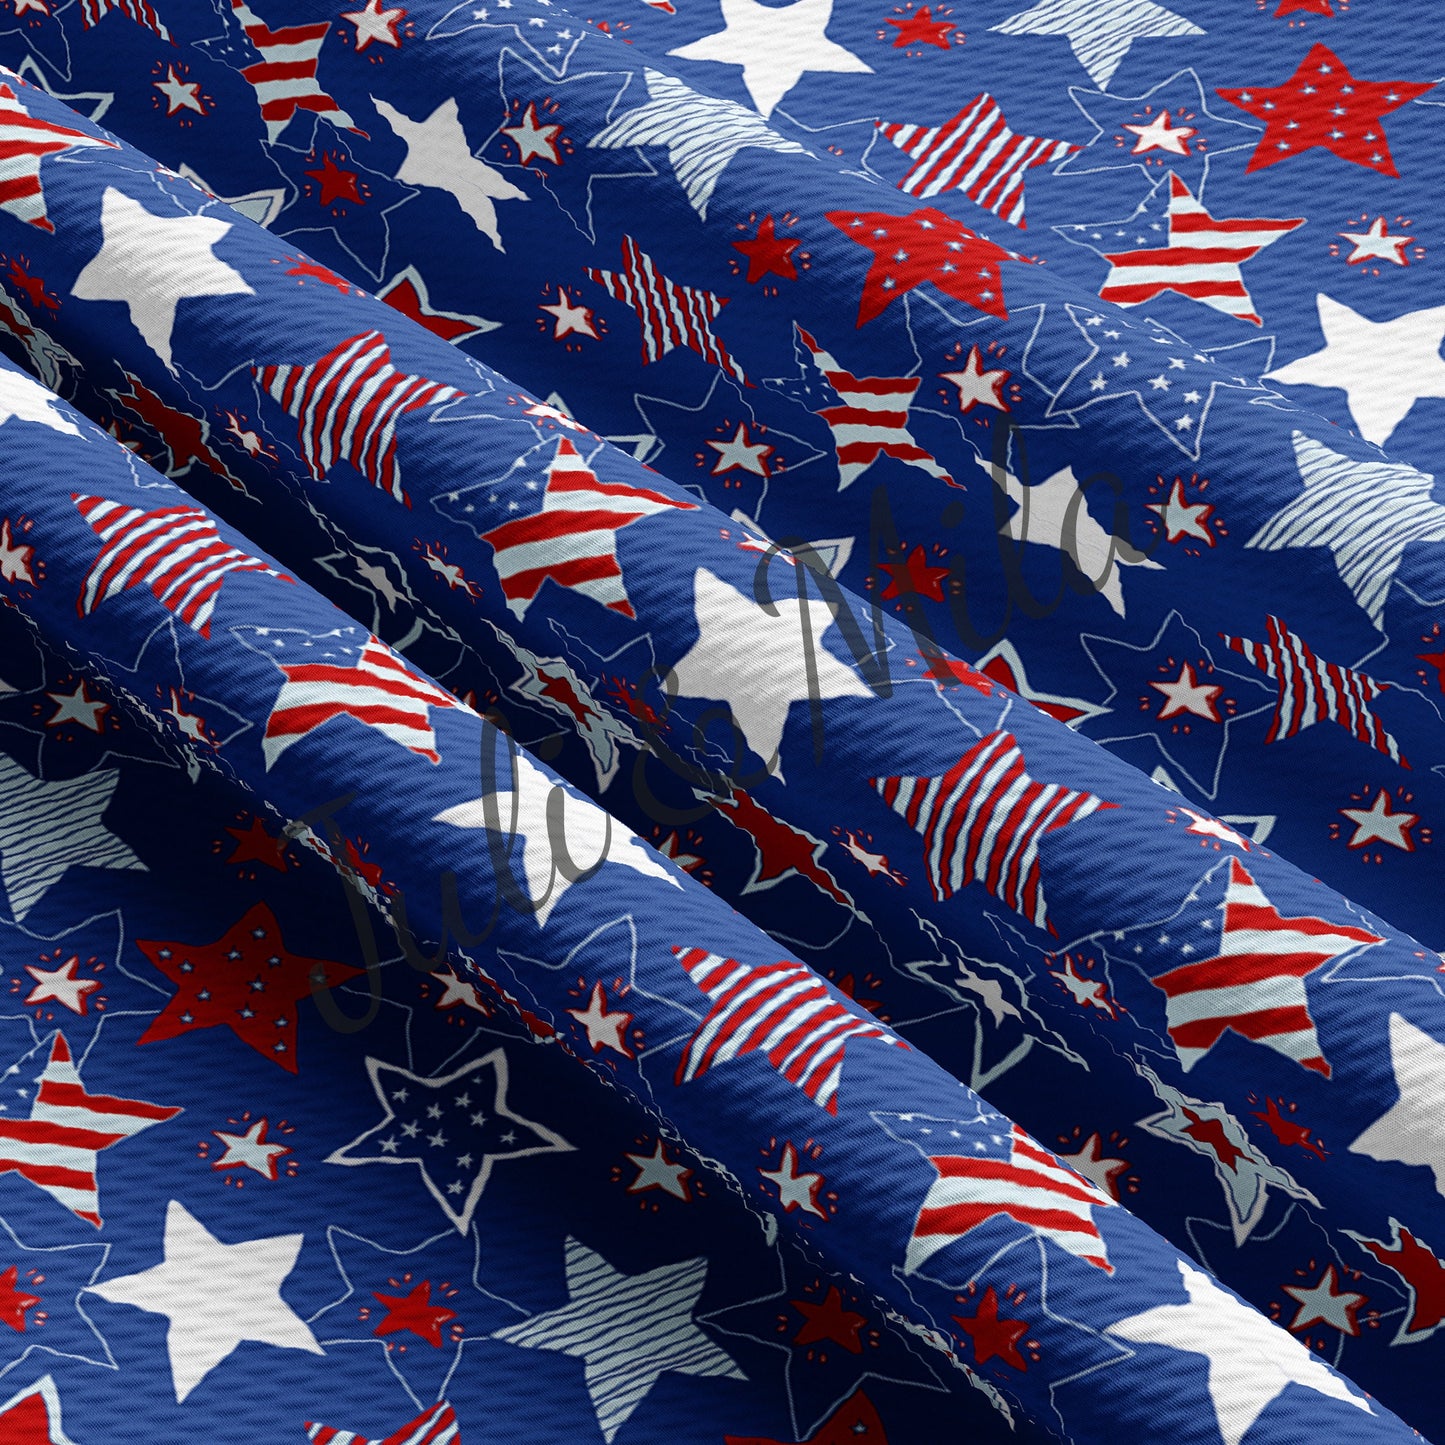 Patriotic 4th of July Printed Bullet Fabric USA Flag PT15